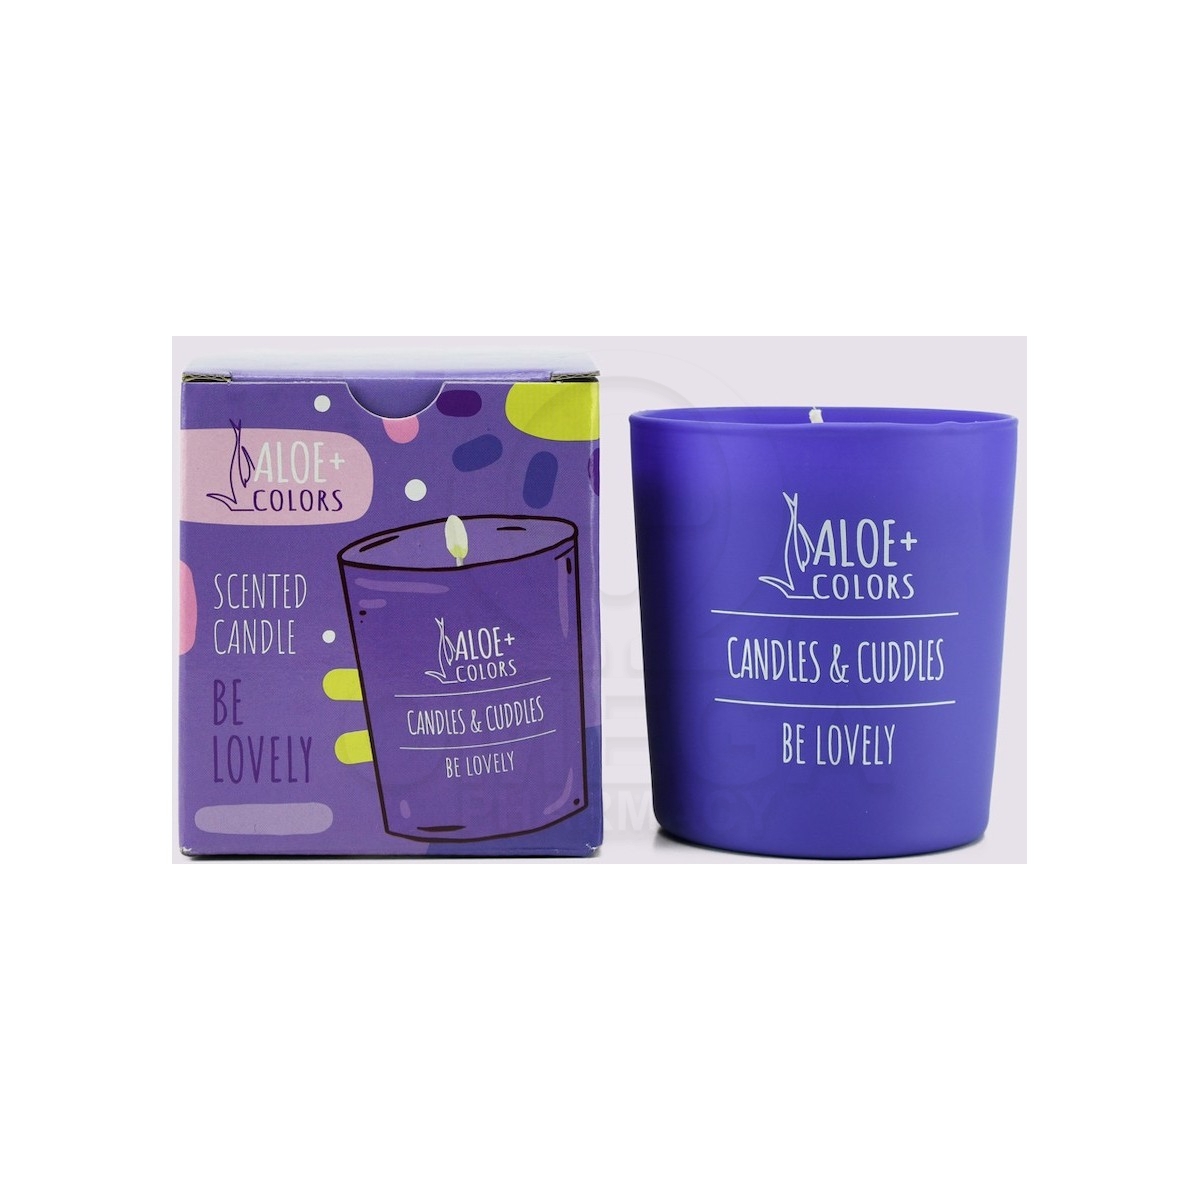 ALOE+ COLORS Be Lovely Scented Soy Candle Κερί Σόγιας με Άρωμα Καραμέλα  Πικραμύγδαλο, 220gr